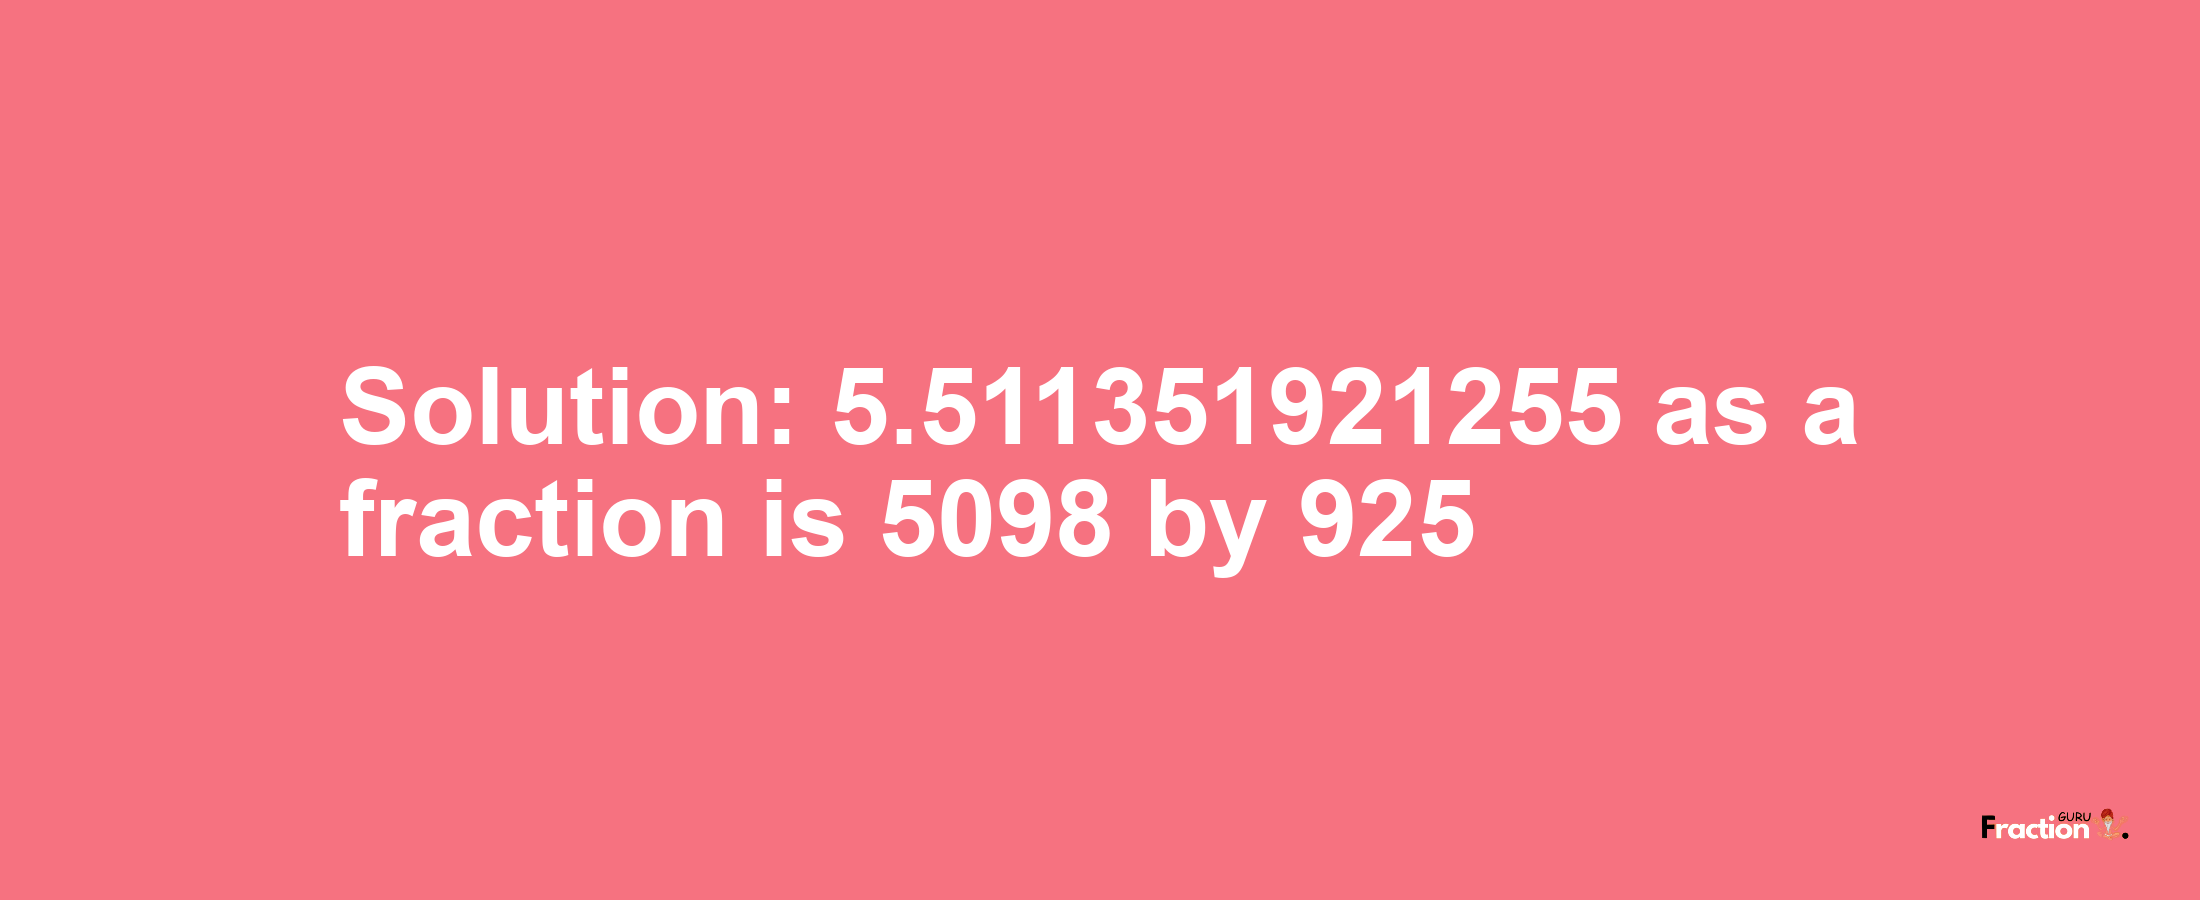 Solution:5.511351921255 as a fraction is 5098/925